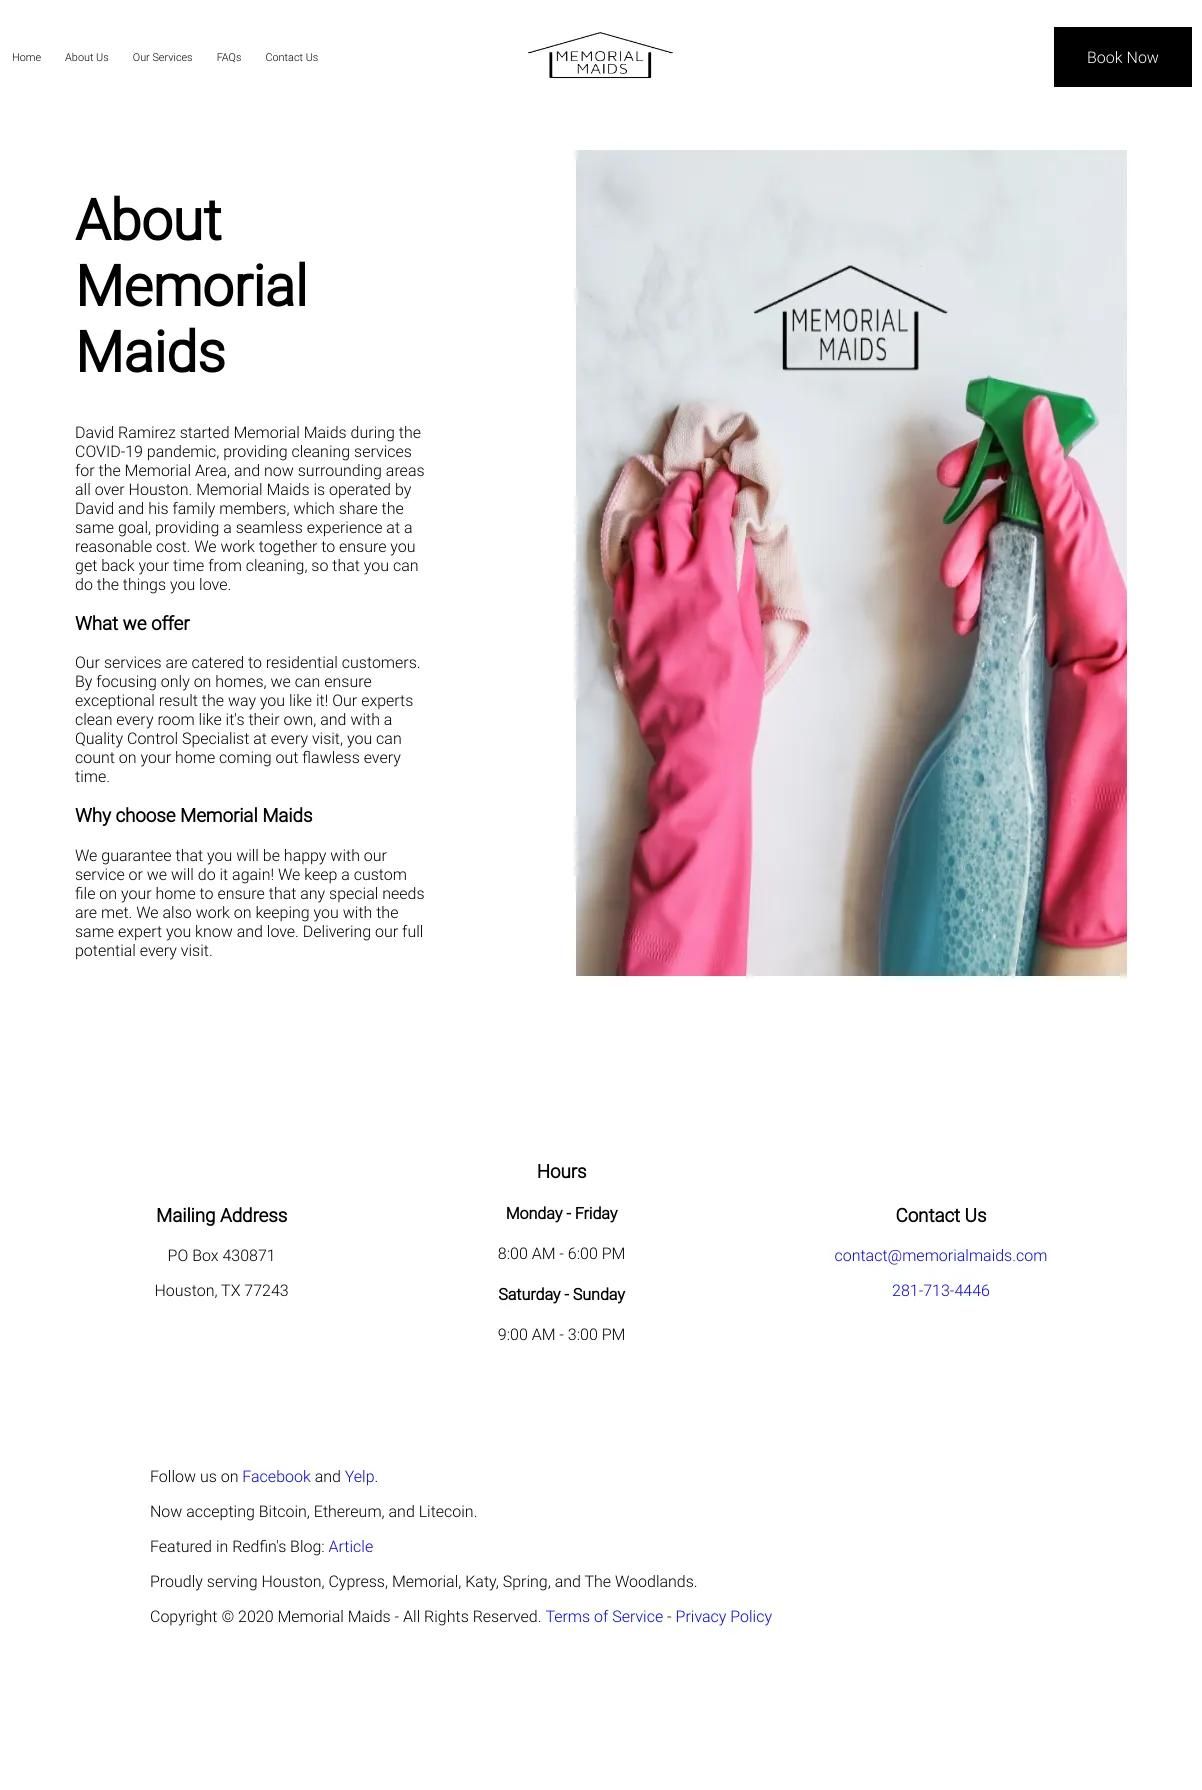 Screenshot 2 of Memorial Maids (Example Squarespace Cleaning Services Website)